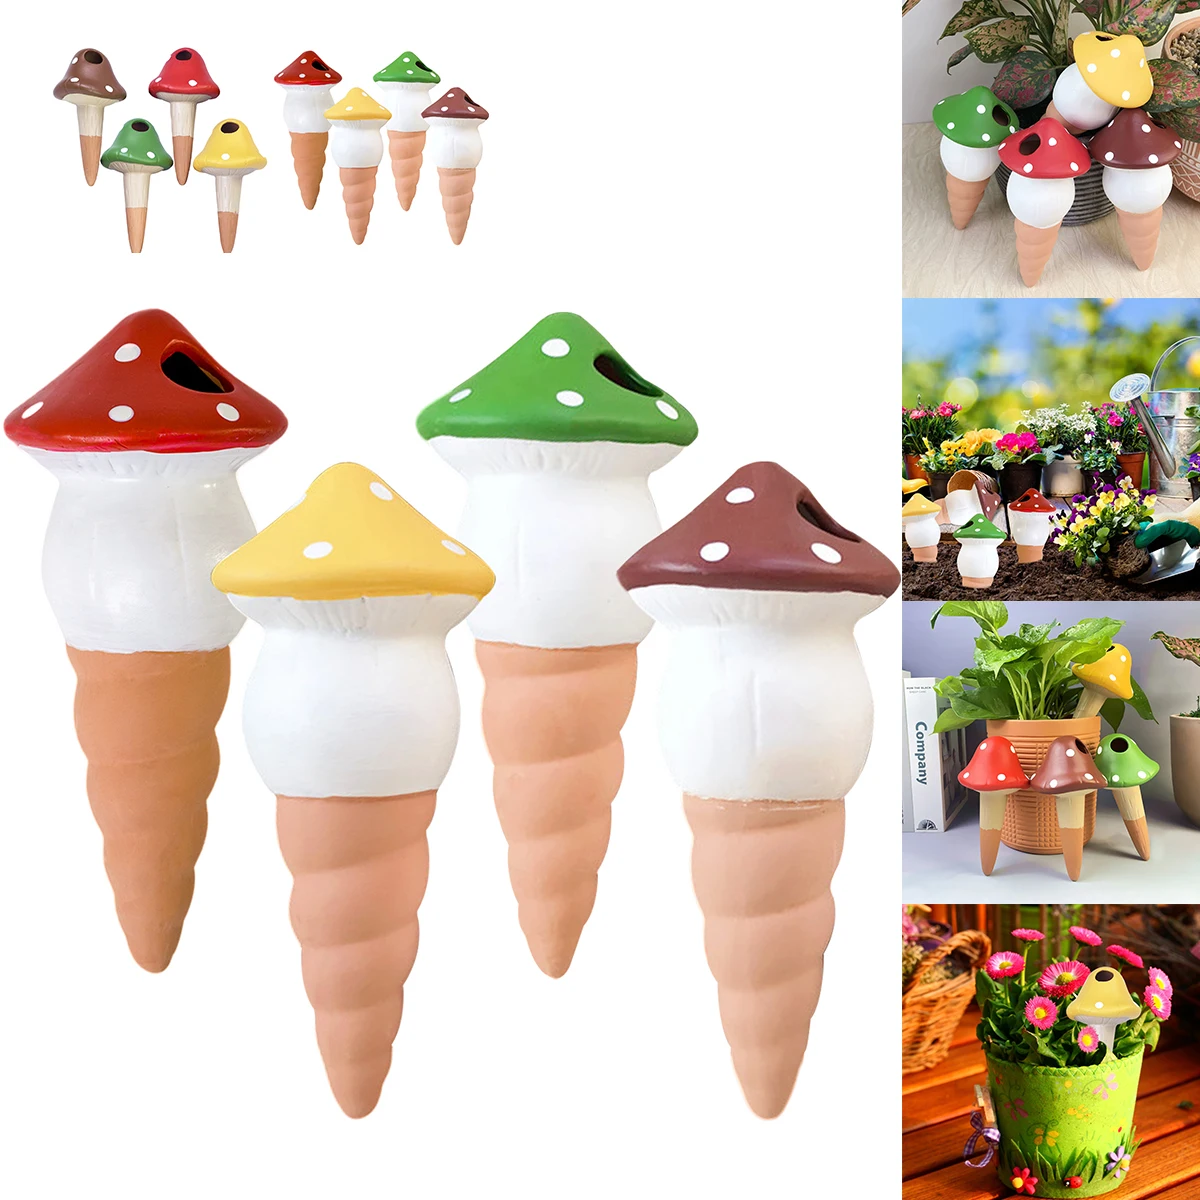 

4Pcs Self-Watering Mushroom Spikes Portable Automatic Terracotta Watering Globe Small Automatic Potted Plant Waterer Cute Garden